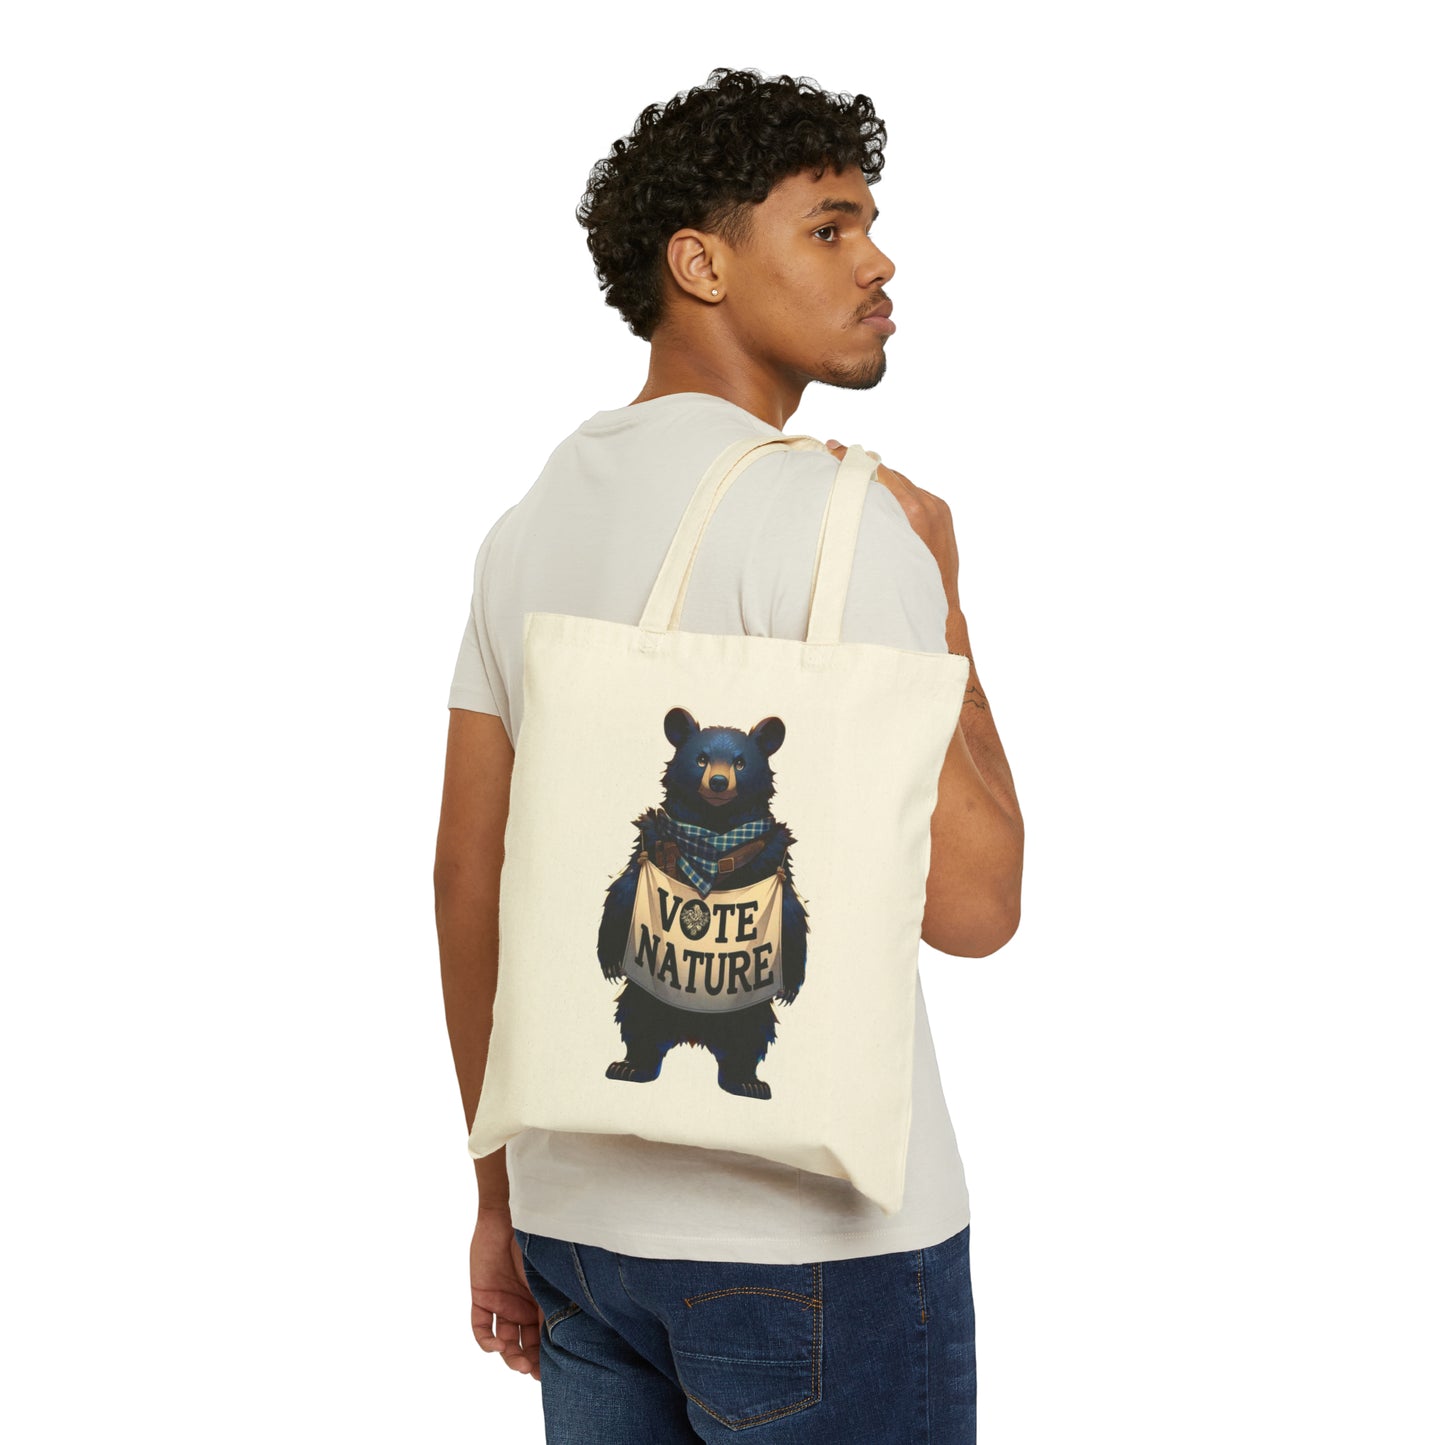 Inspirational Caring Black Bear Cotton Canvas Tote Bag: Vote Nature! & carry a laptop, kindle, phone, notebook, goodies to work/coffee shop